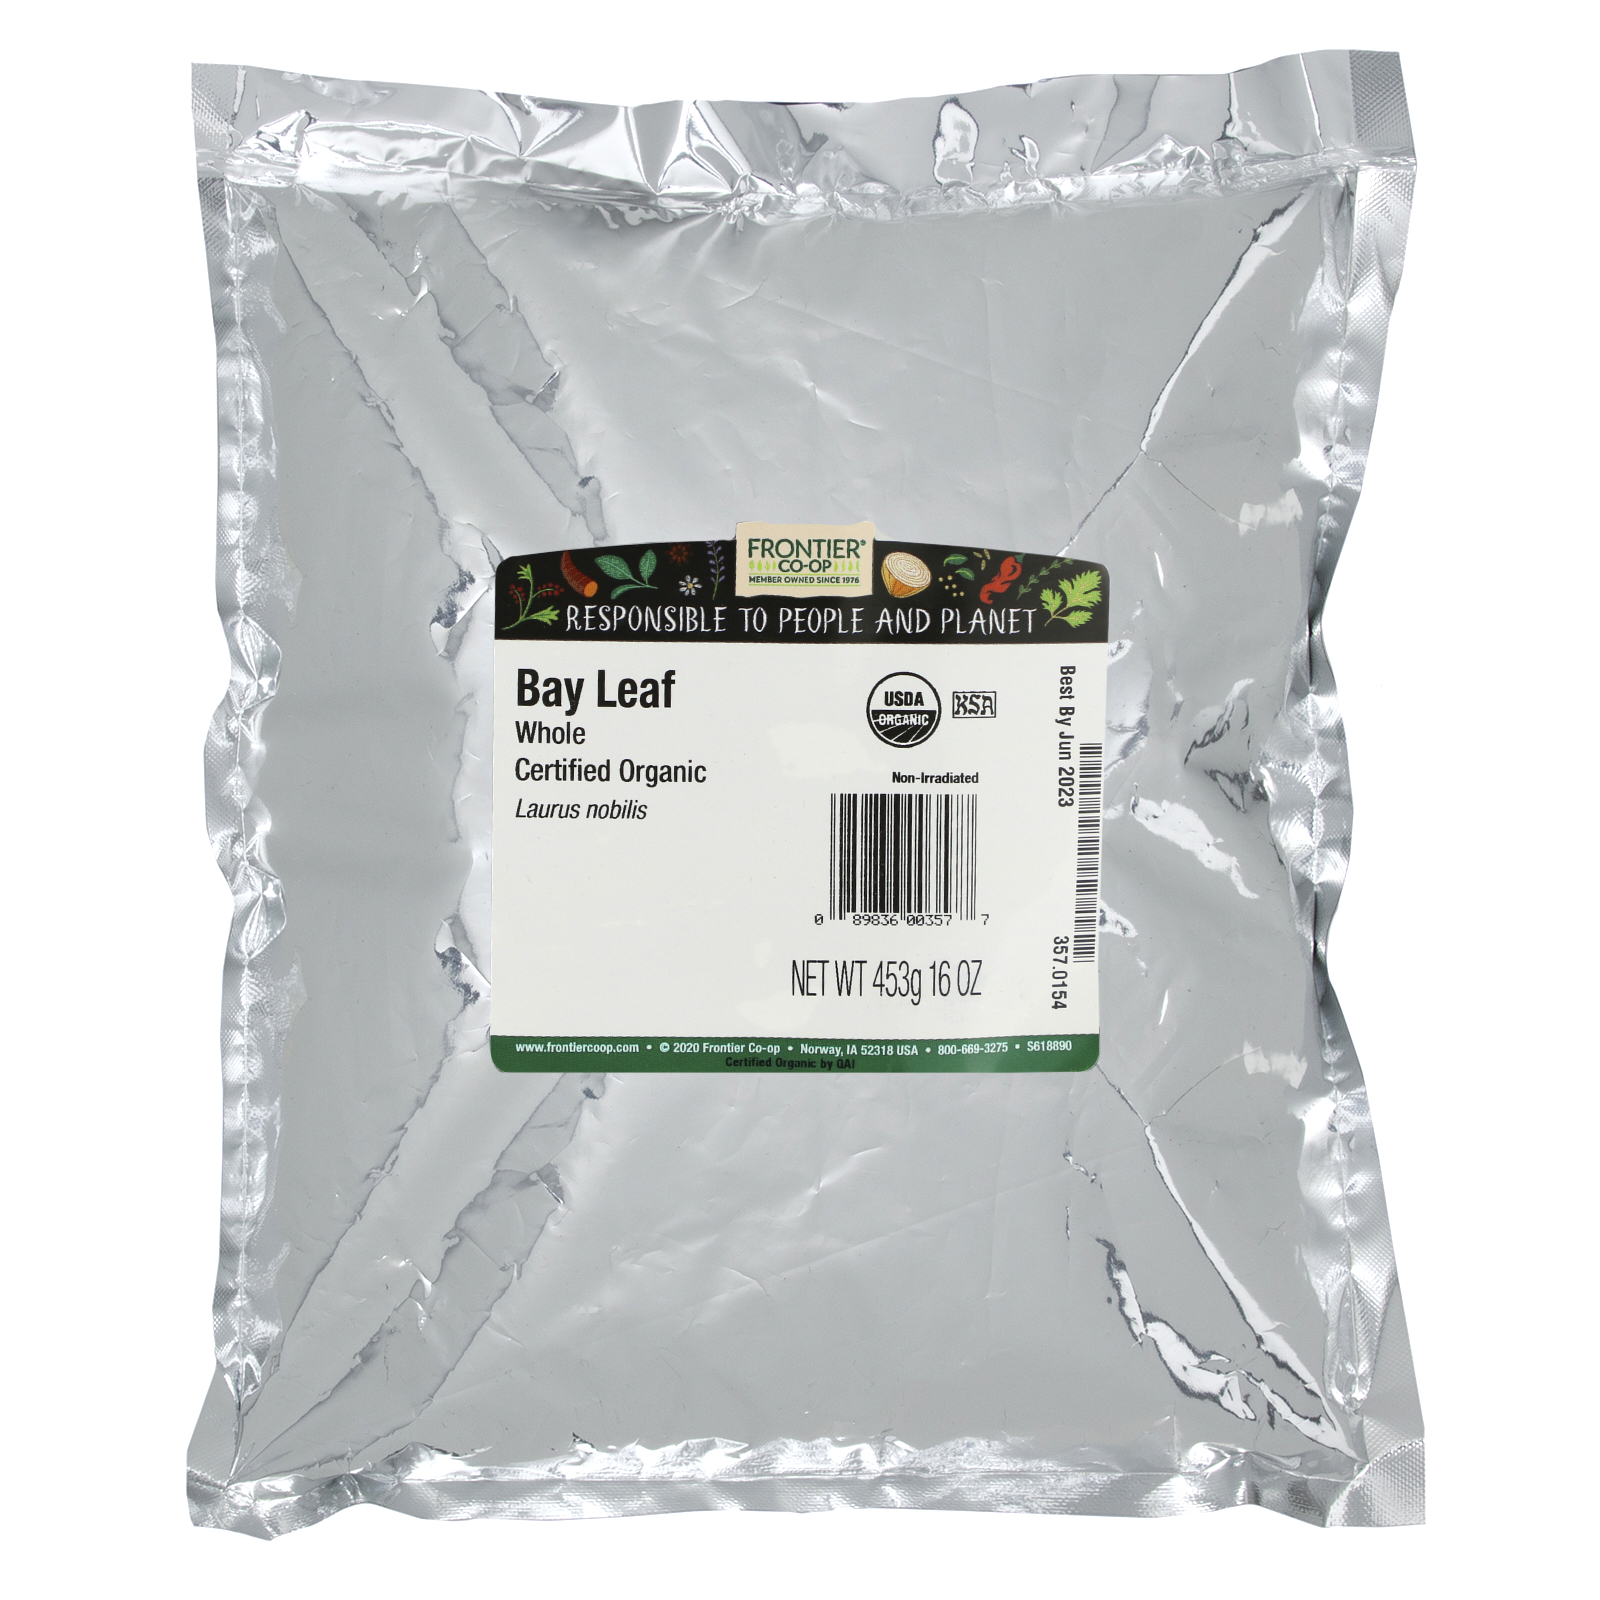 Frontier Co-Op Hand-Select Bay Leaf, Whole, Certified Organic, Bulk 16 oz. - image 3 of 8